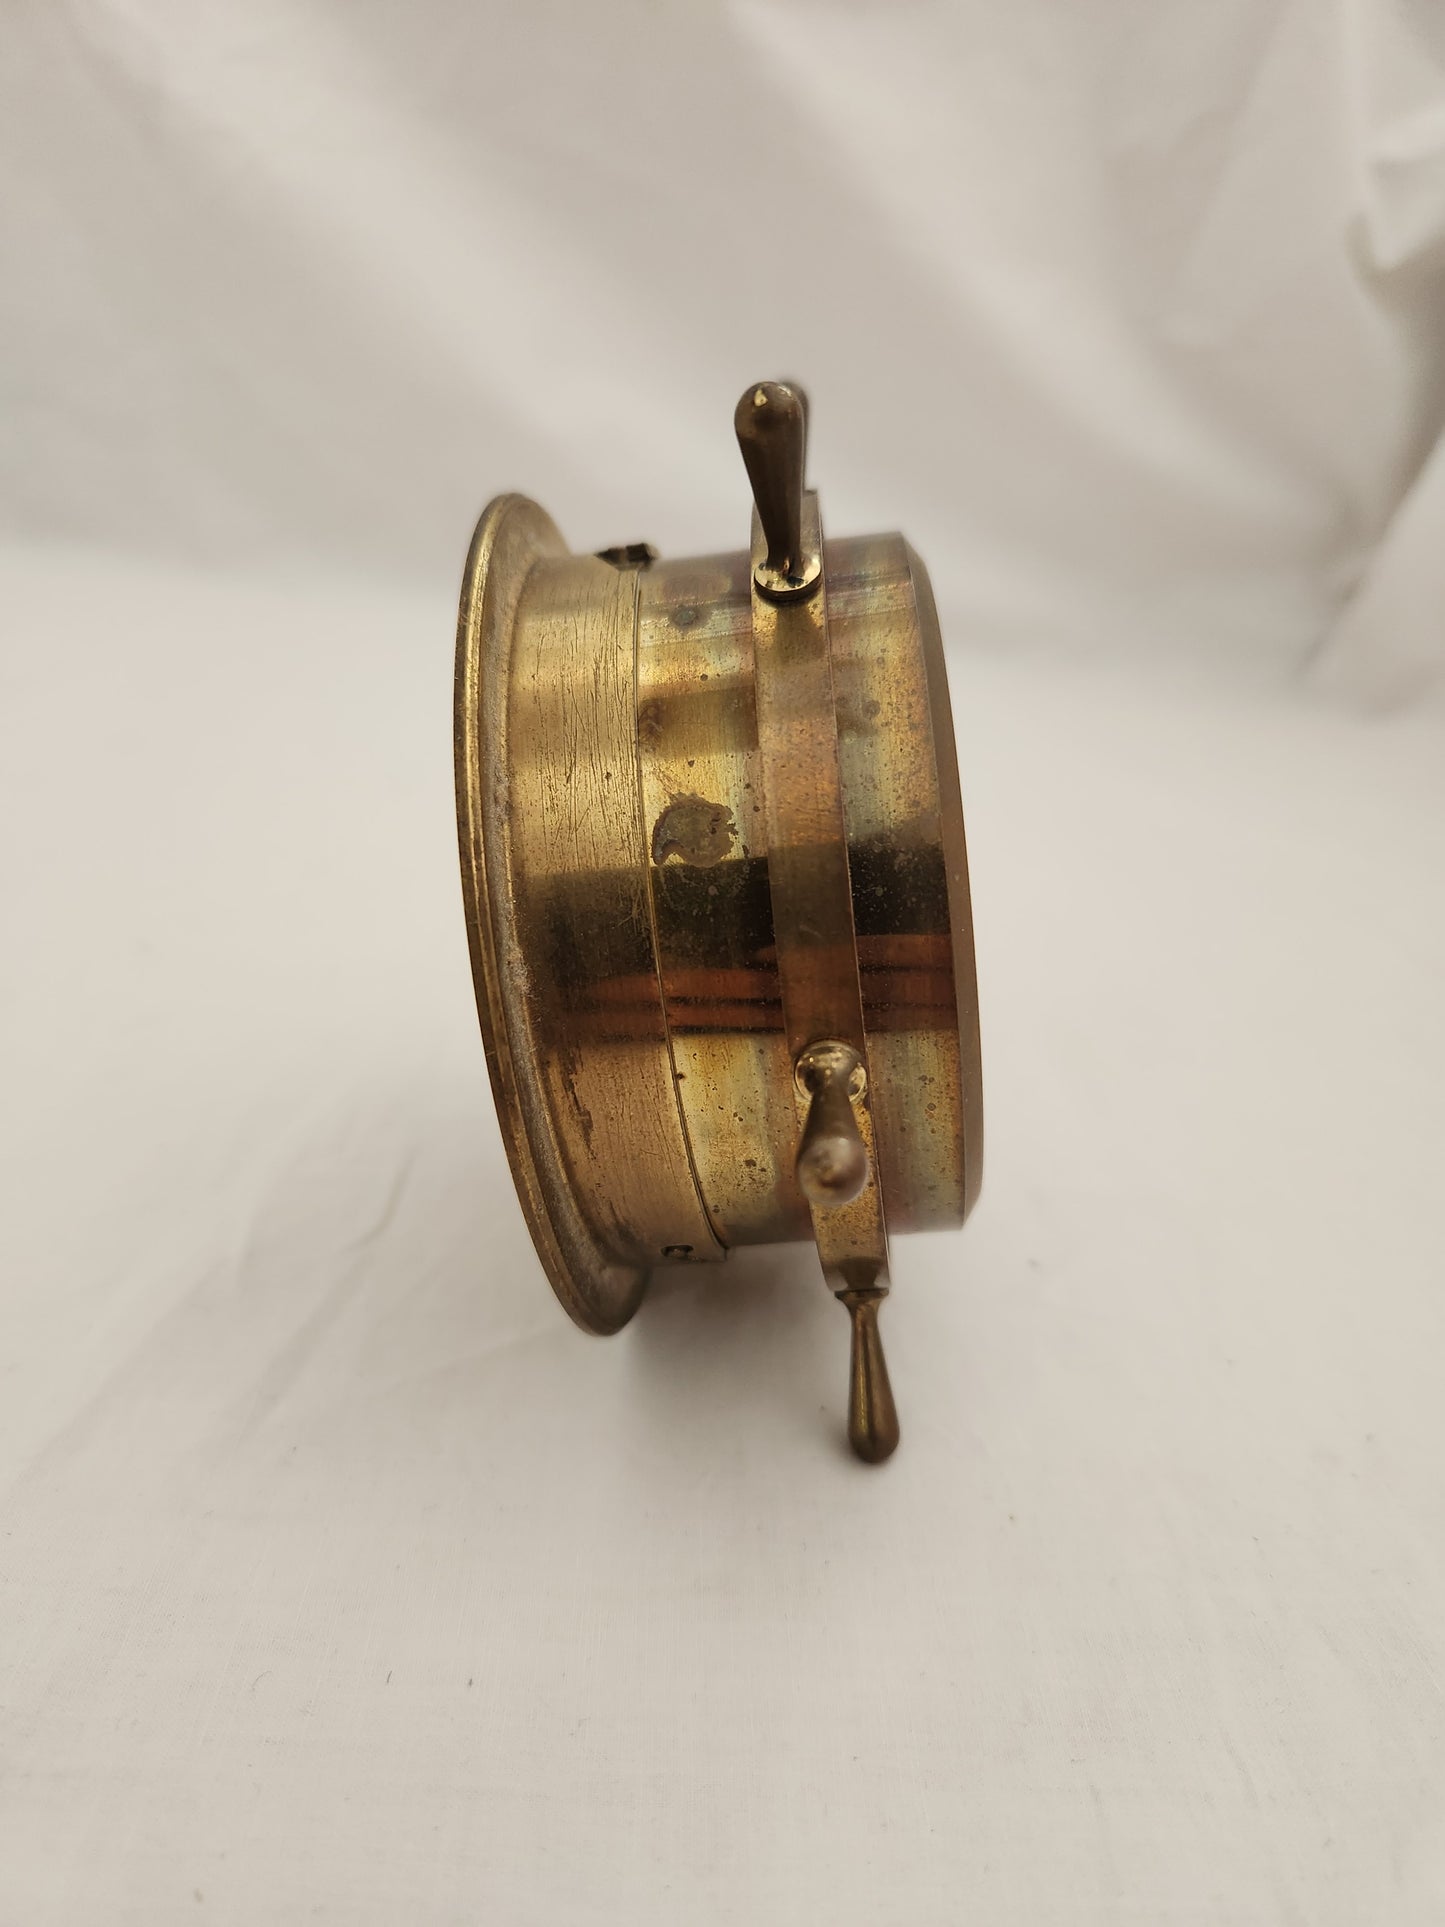 VTG - 8-Day 7-Jewels Helmsman Brass Clock made in Germany by Time & Tide Inc.